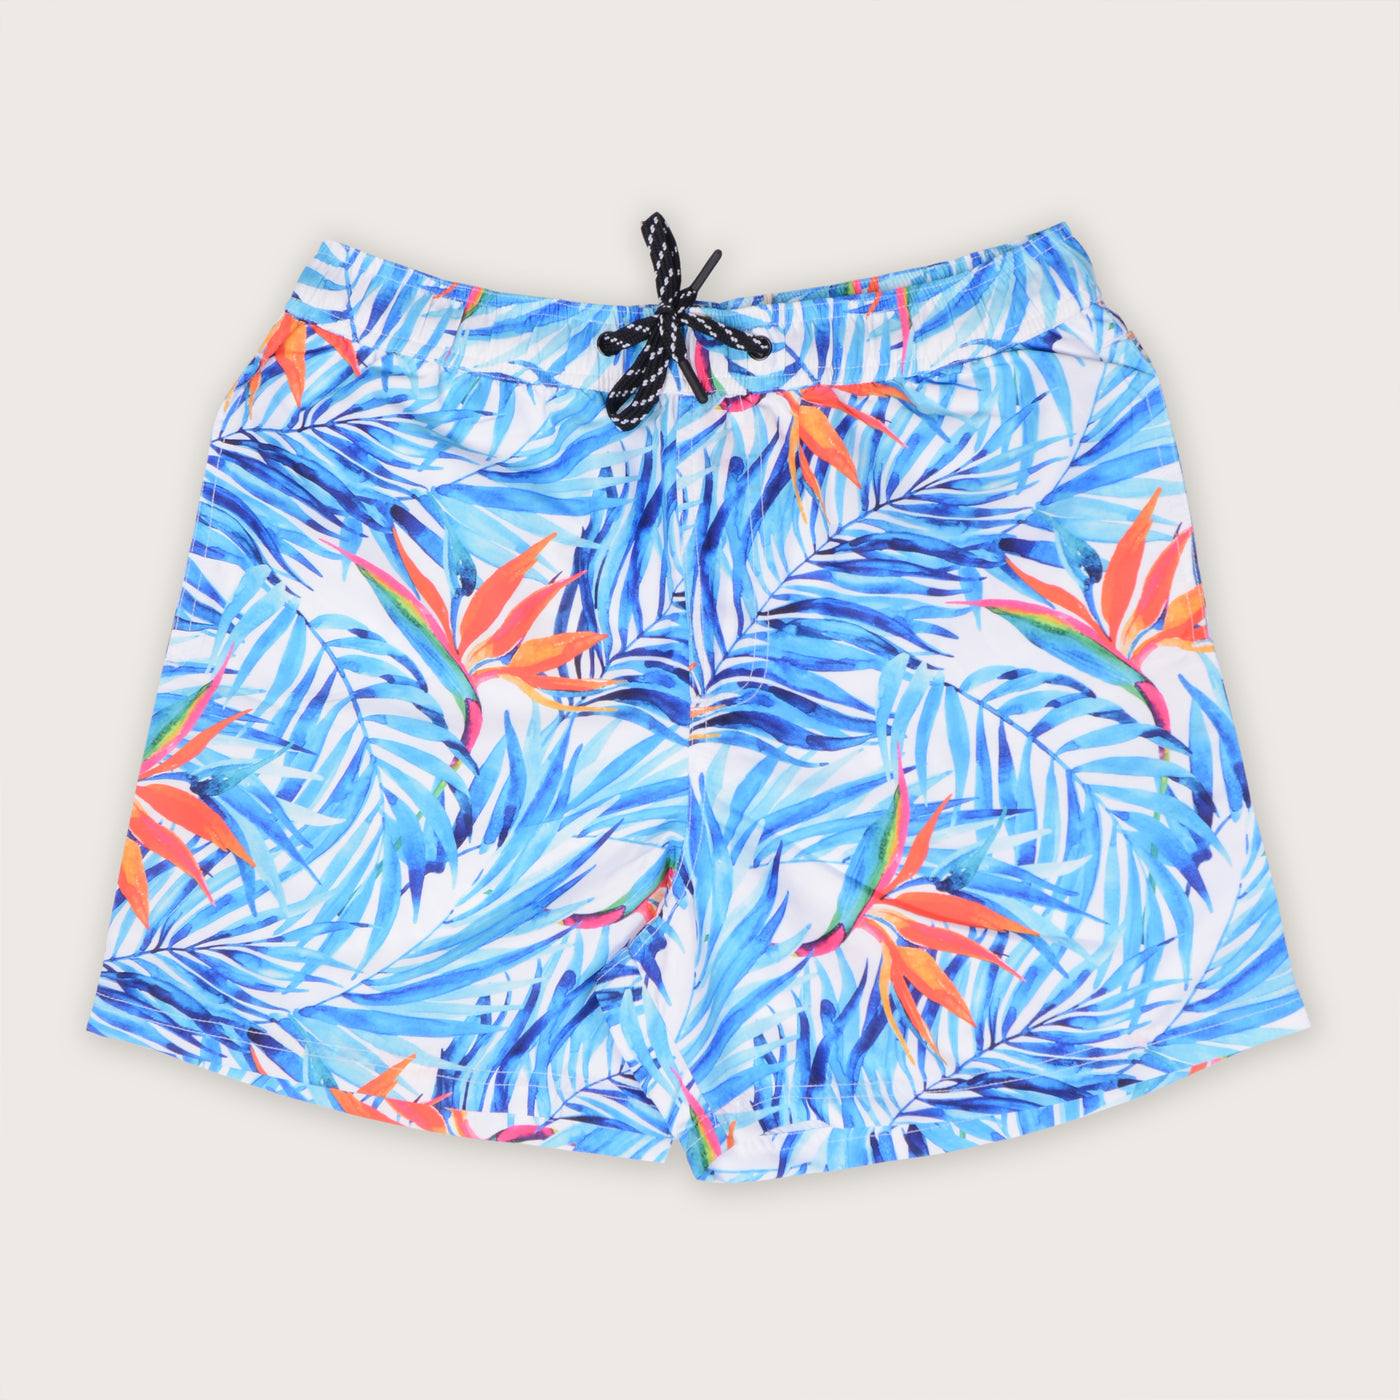 Buy now beach vibes only swim shorts